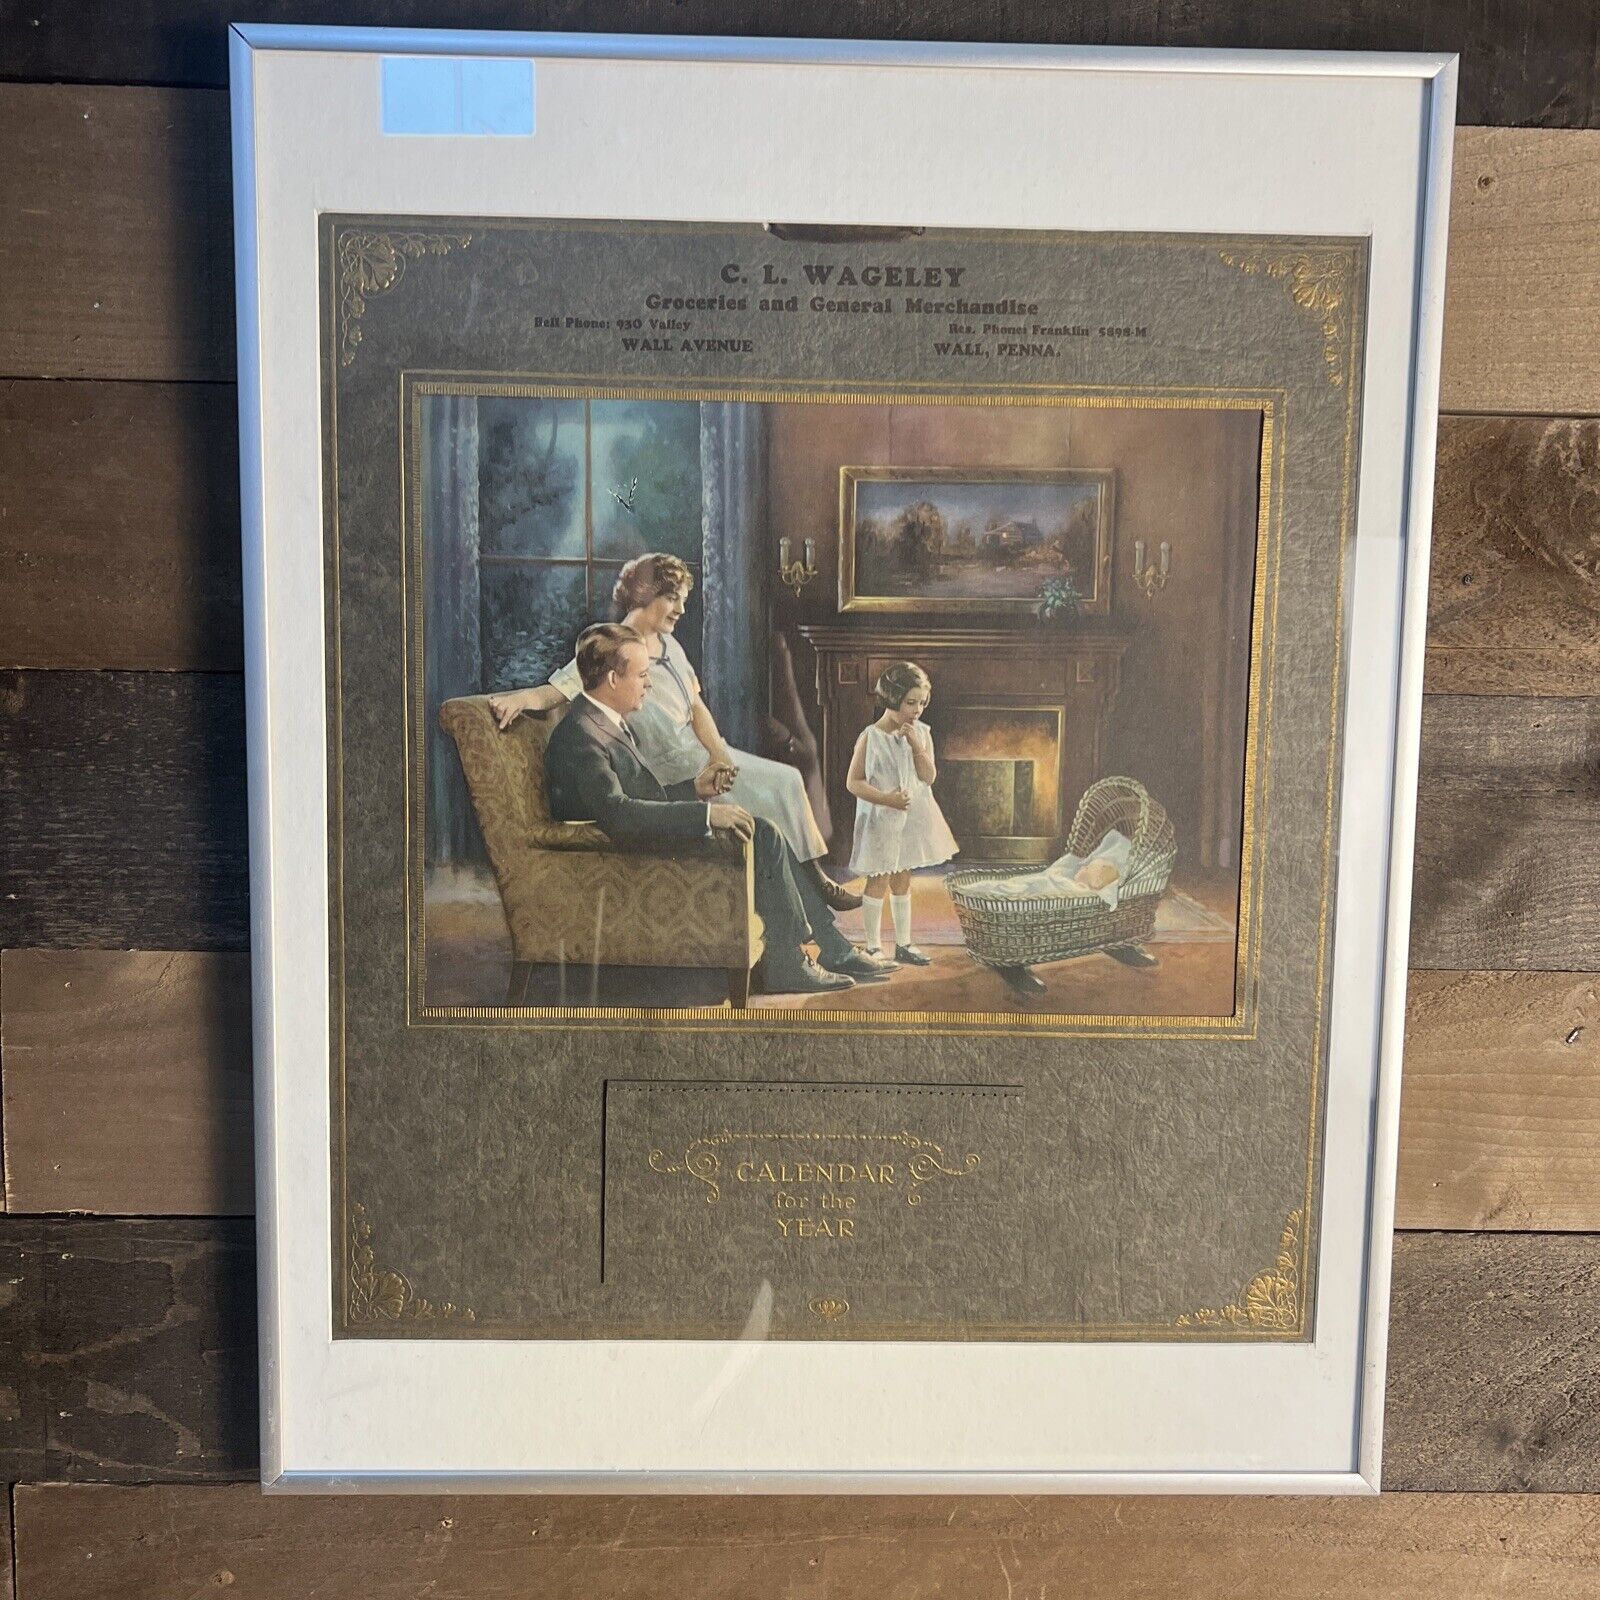 ANTIQUE C.L. WAGELEY GROCERIES AND MERCHANDISE CALENDAR FOR THE YEAR IN FRAME